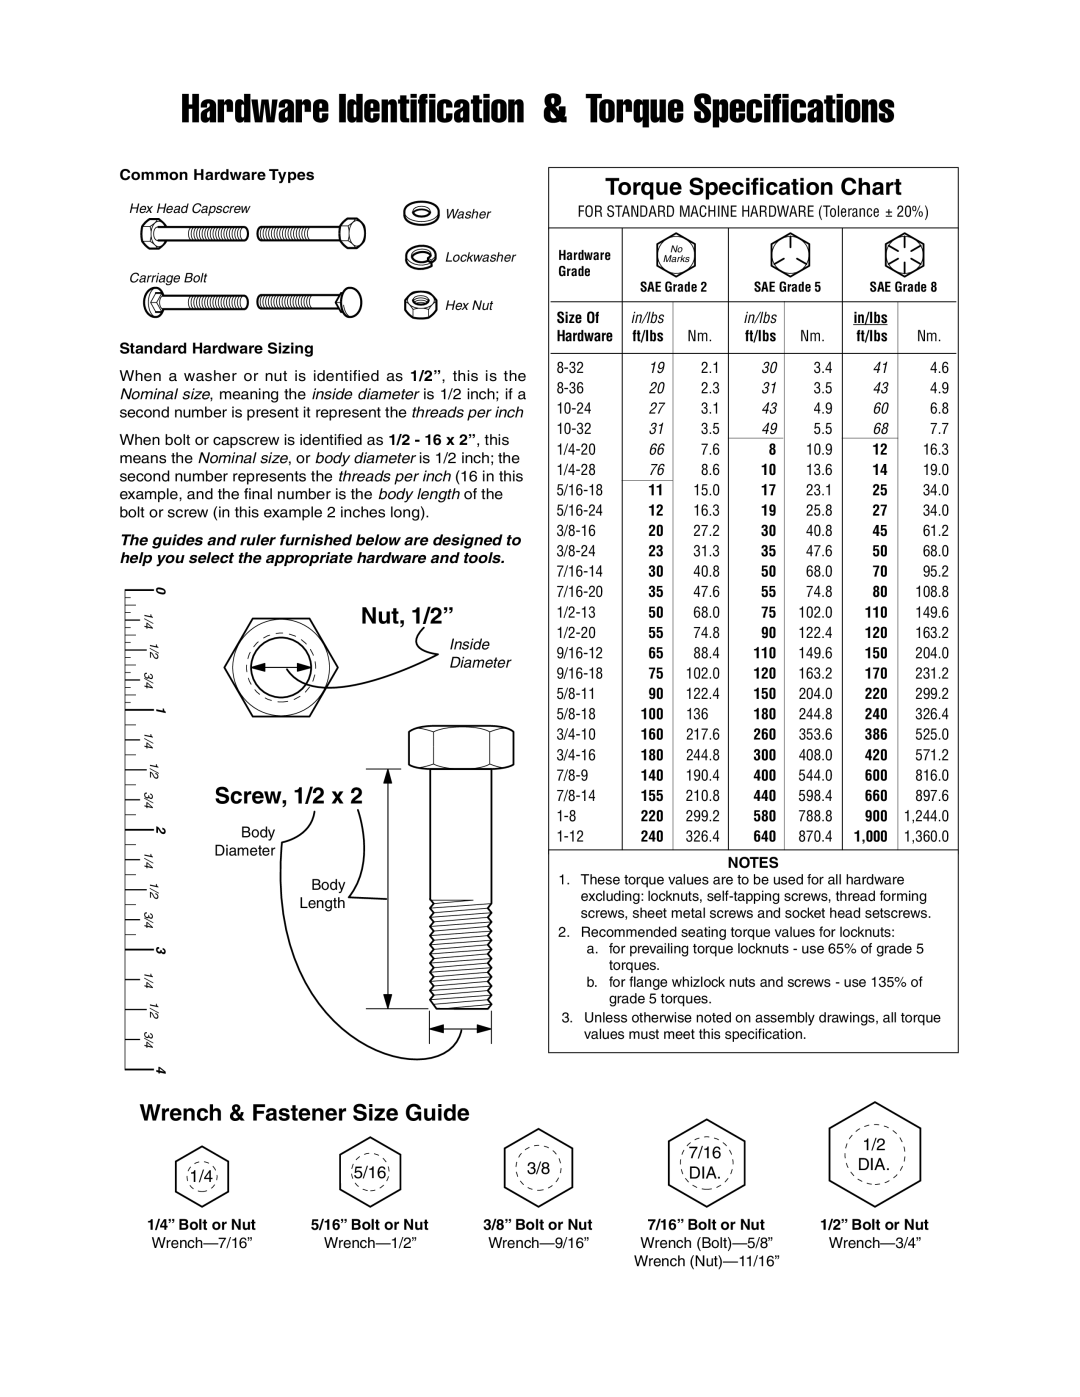 Snapper 4582 Wrench & Fastener Size Guide, Hardware Identification & Torque Specifications, Torque Specification Chart 